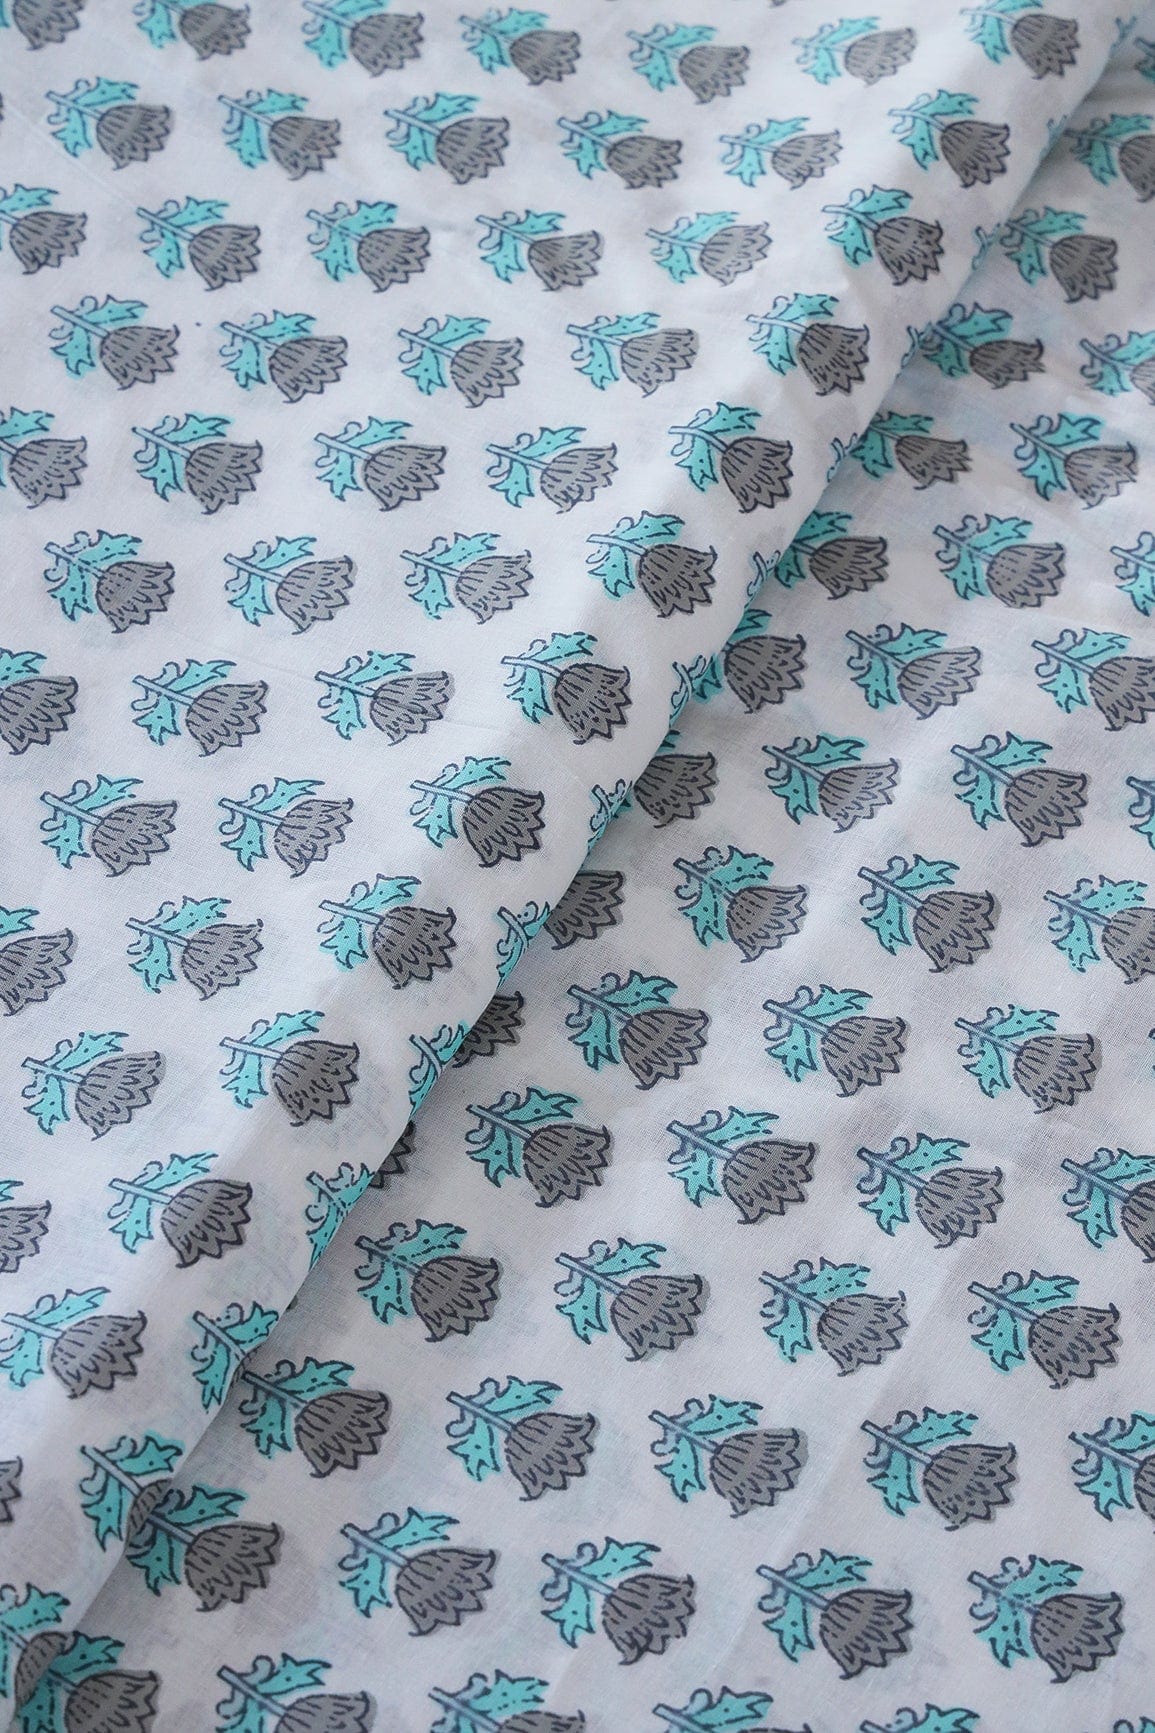 doeraa Prints Grey And light Teal Floral Pattern Print On White Pure Cotton Fabric